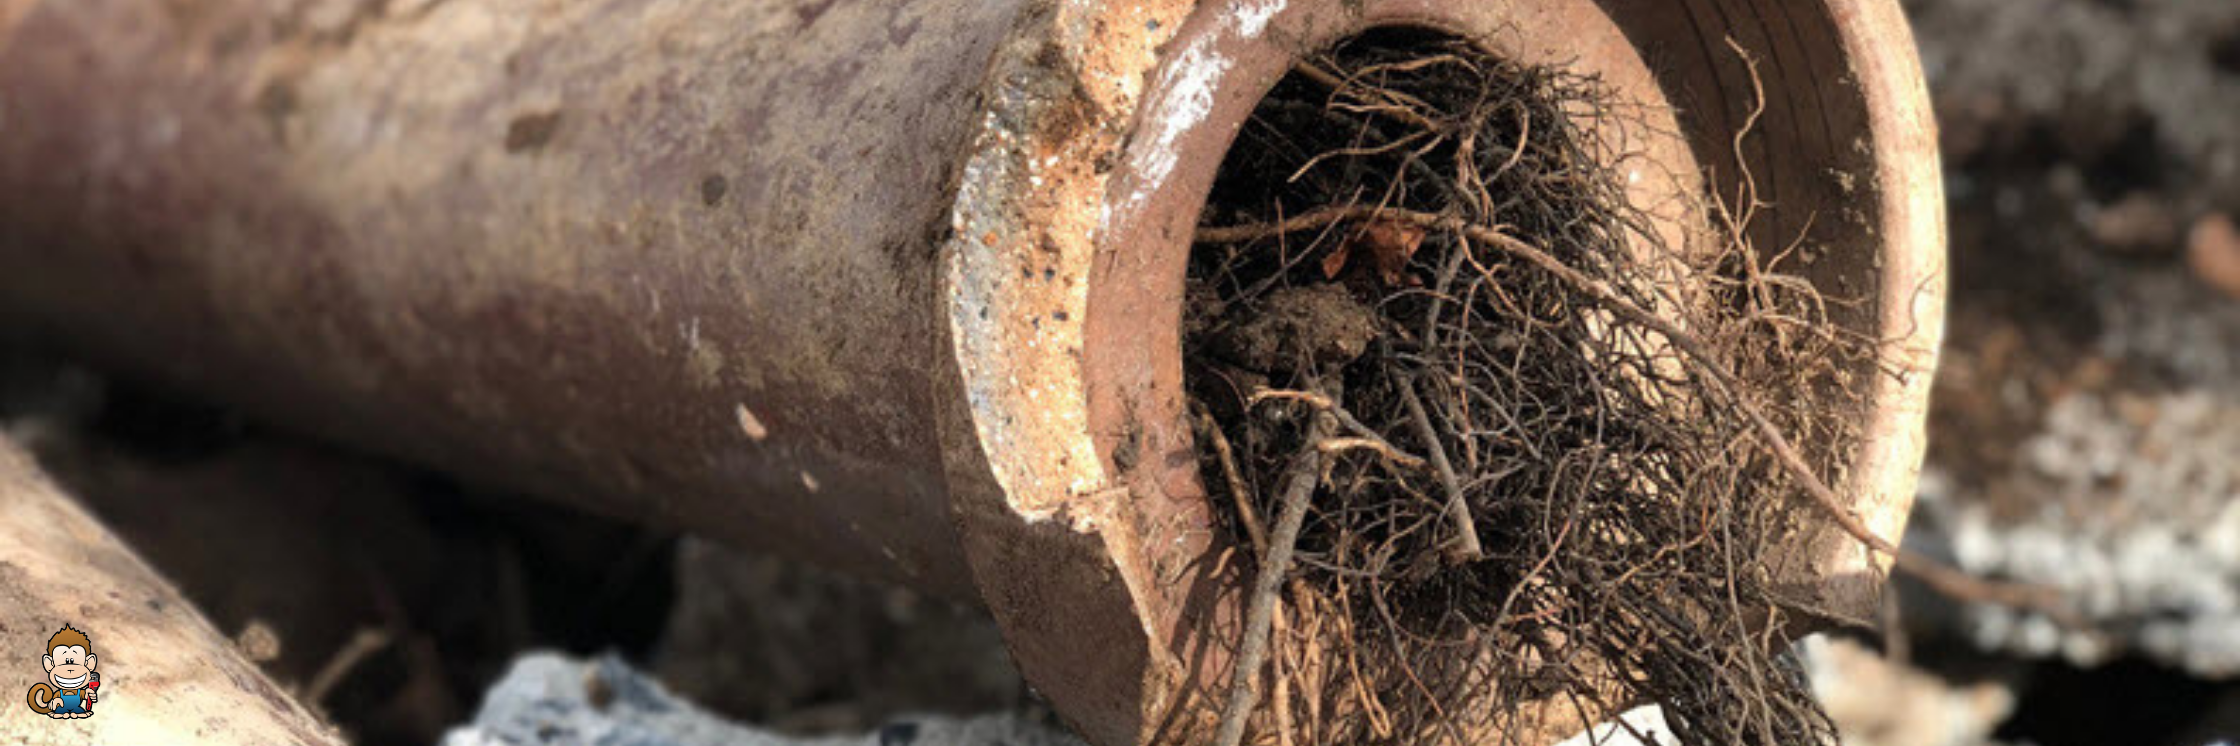 Why Are There Roots in My Sewer Pipes?